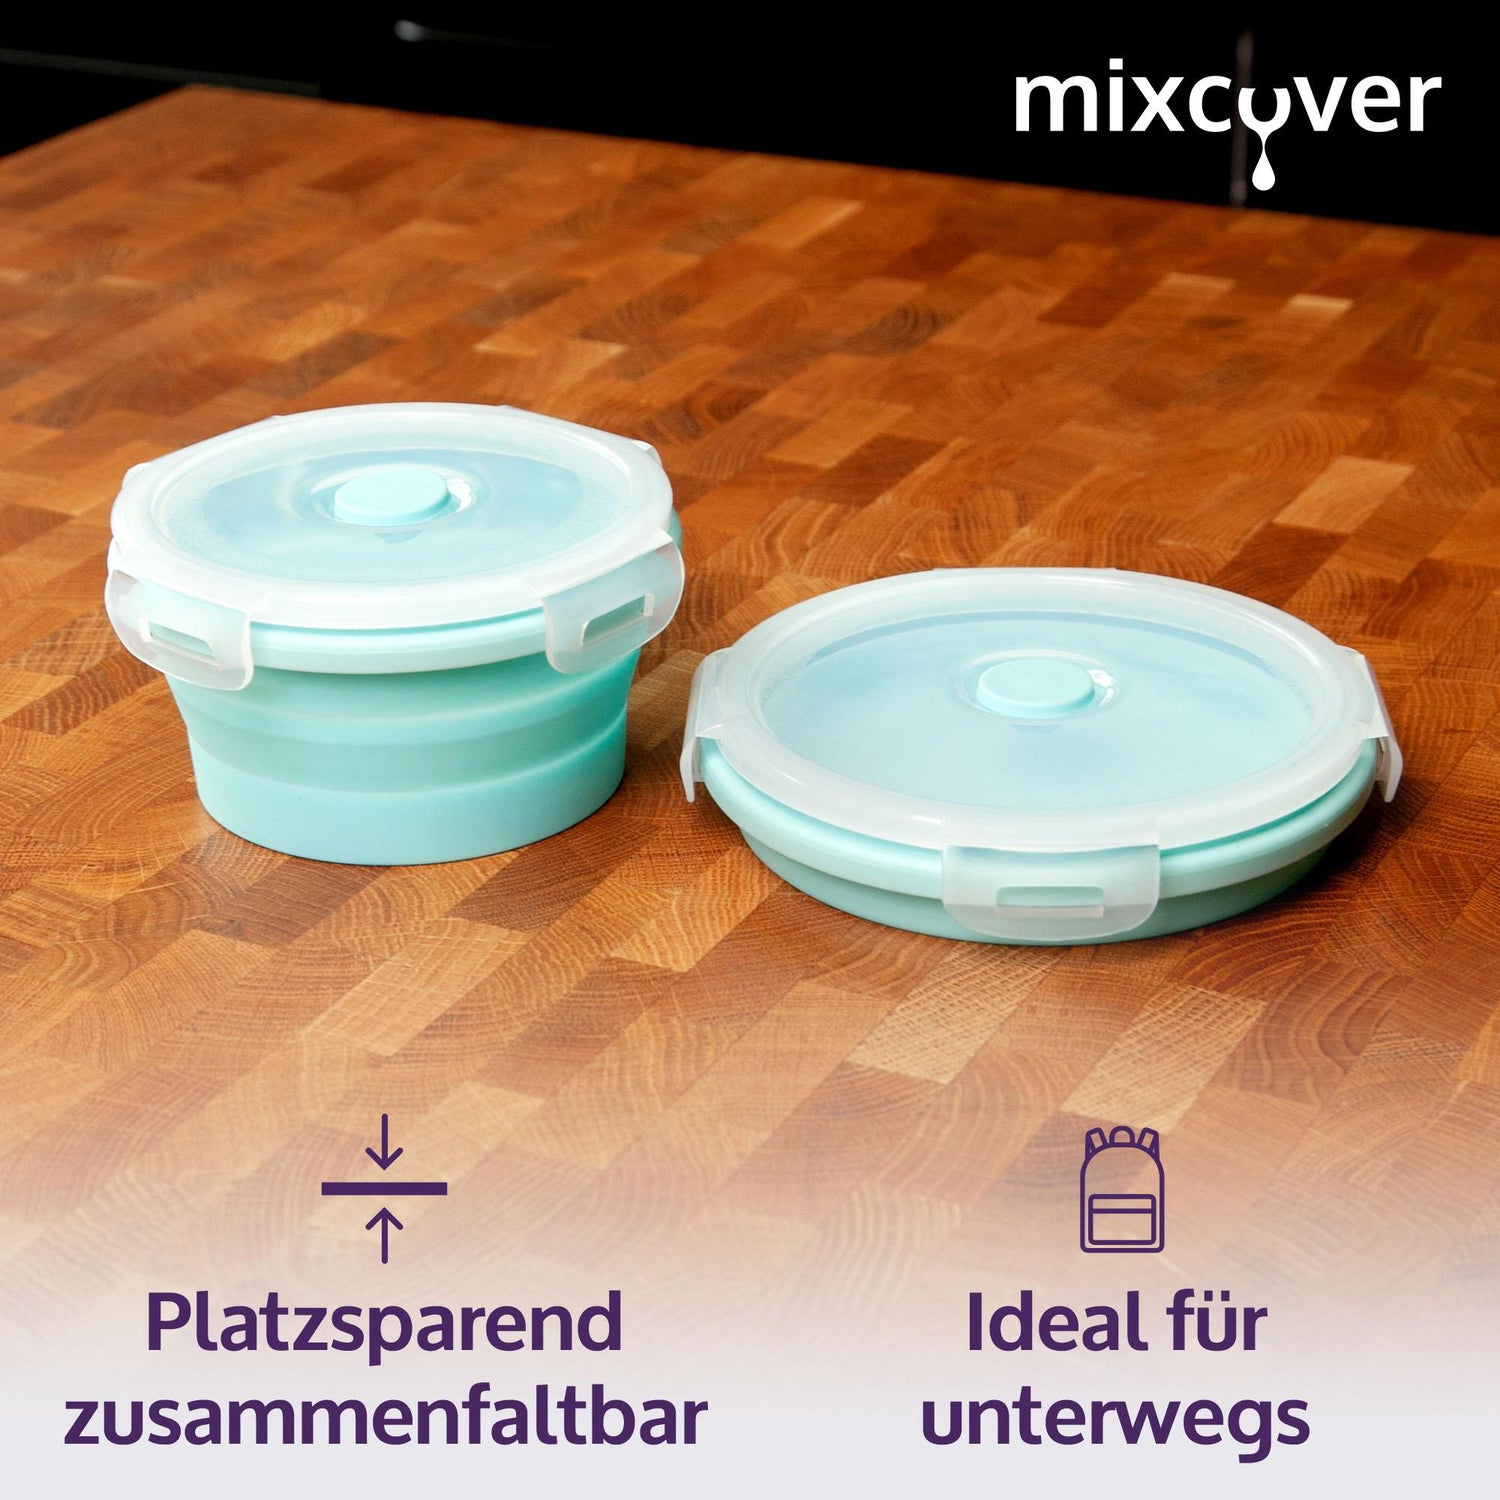 Mixcover Foldable freshlocks set with lid made of silicone bentobox lunch  box lunch box picnick camping bowl bpa -free space saving 250 ml 500 ml  green - Mixcover